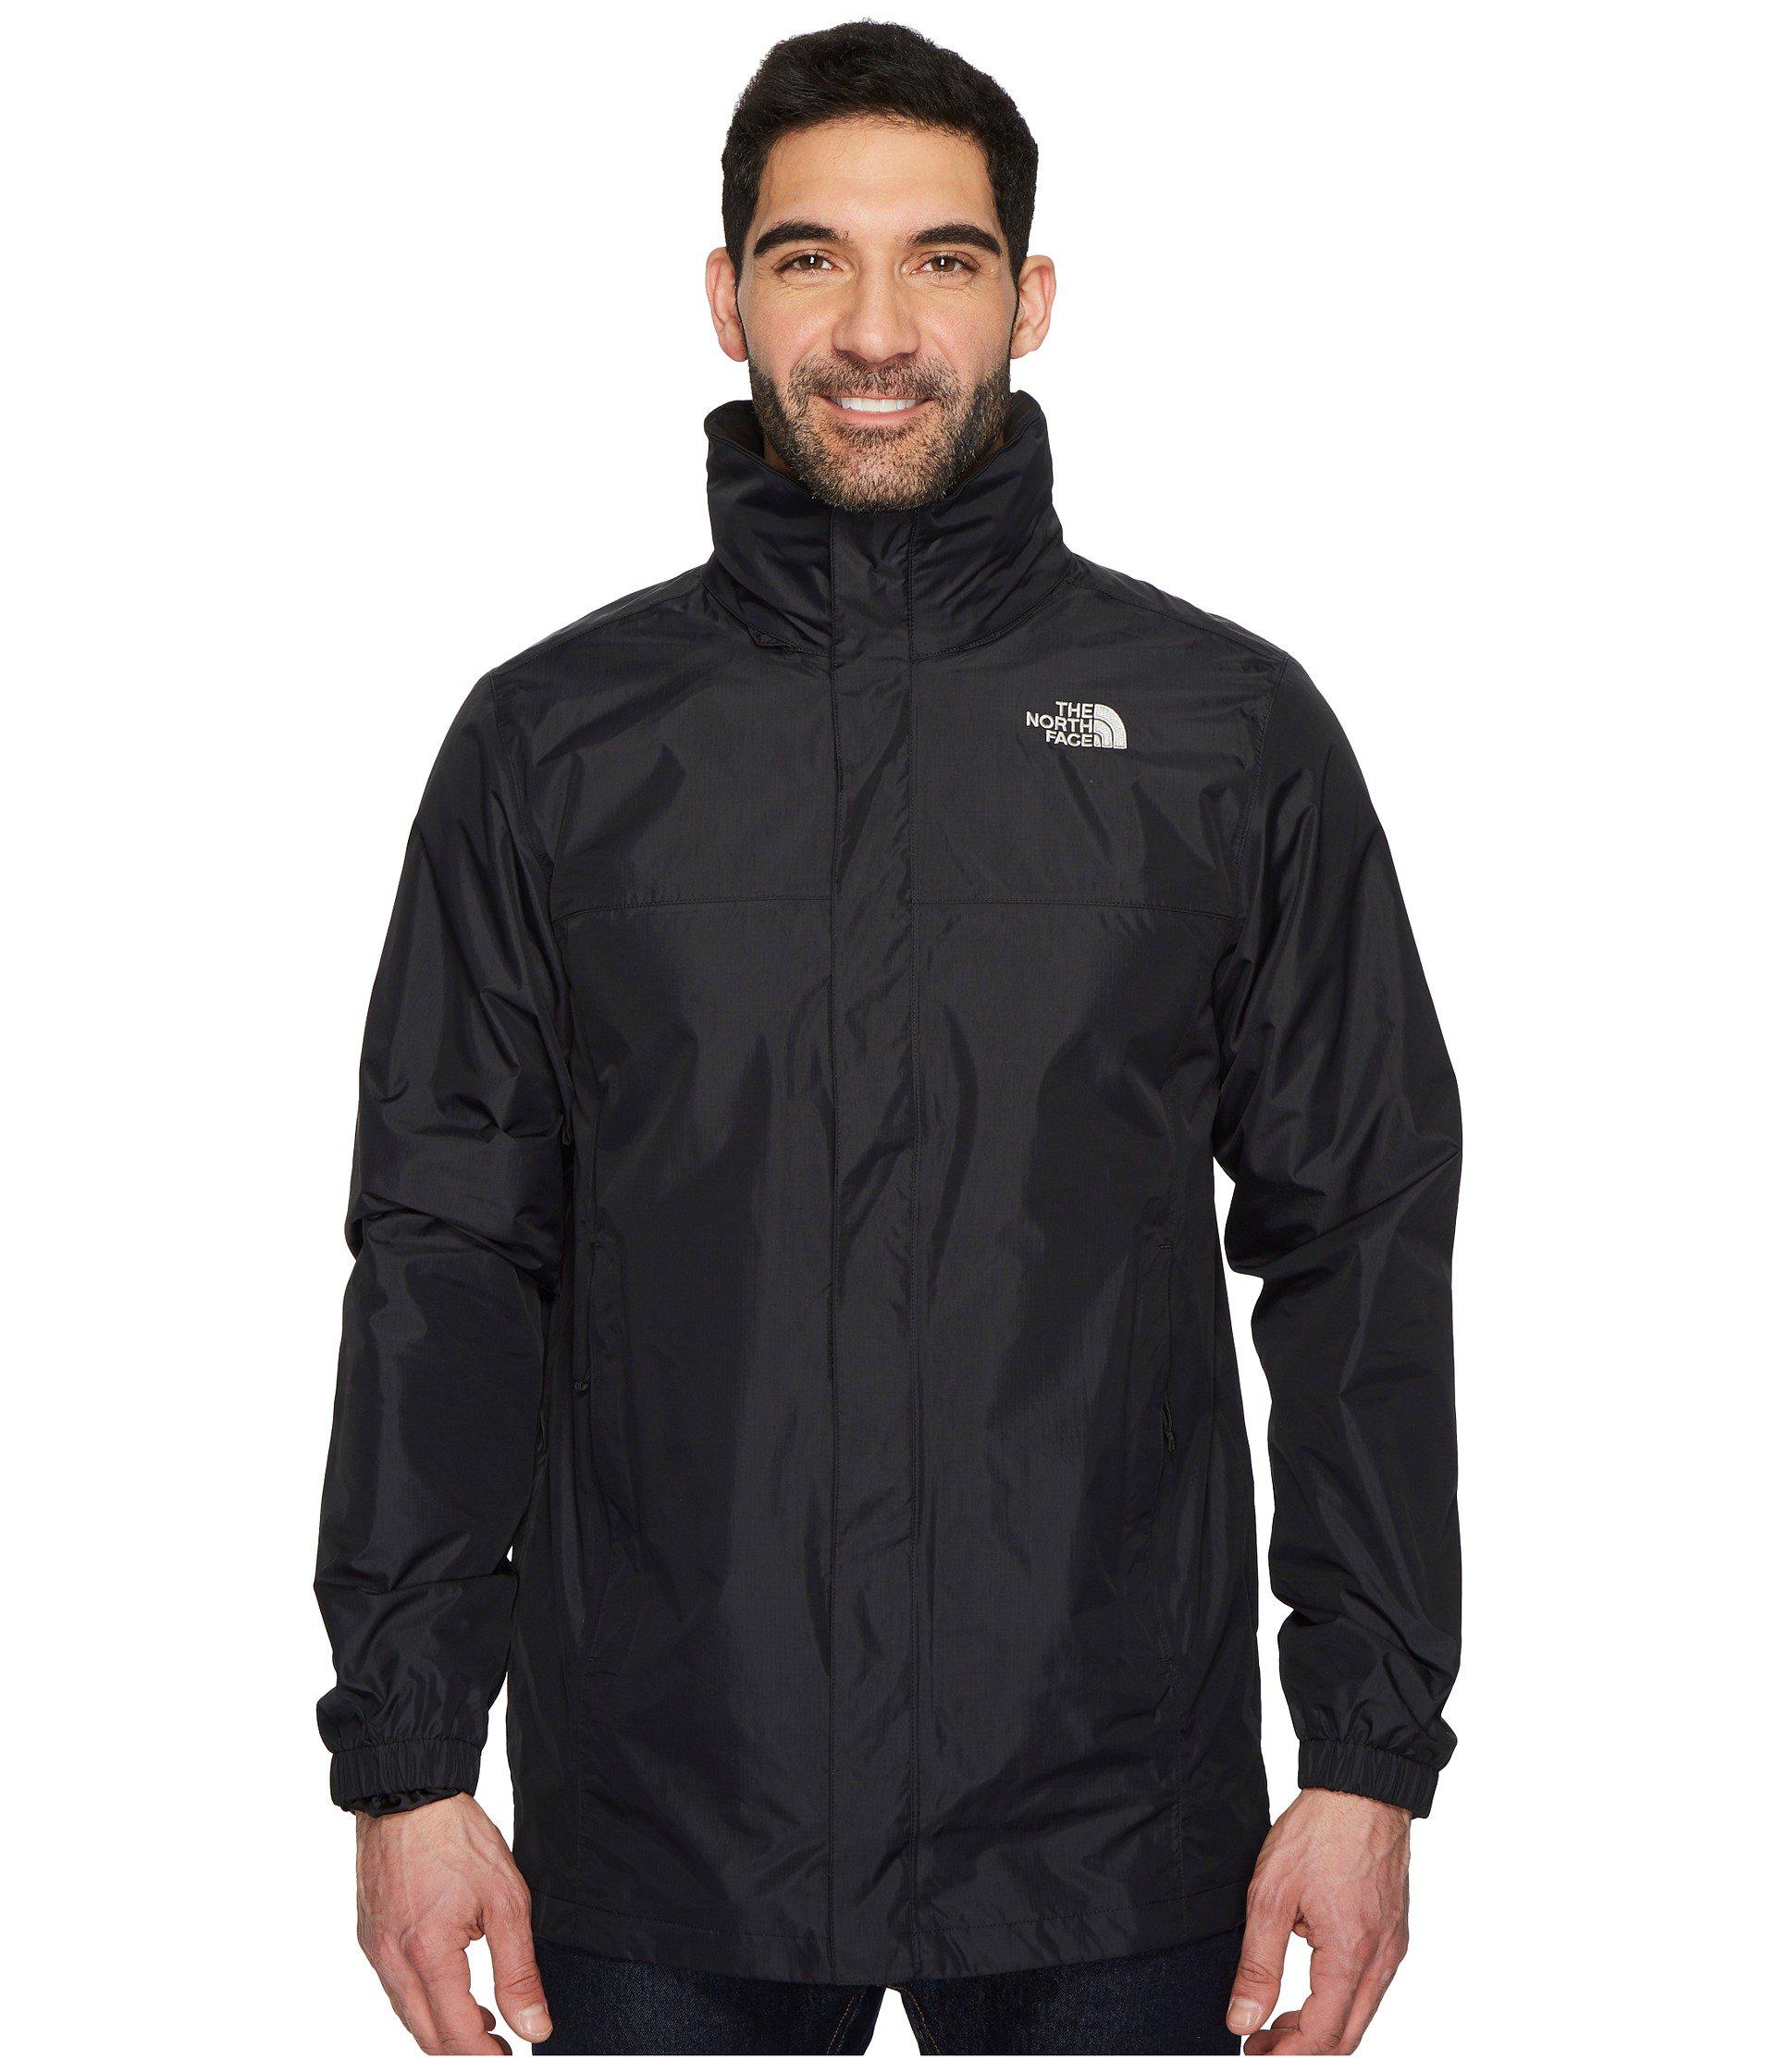 The North Face Men's Resolve Parka Discount, 50% OFF |  www.smokymountains.org